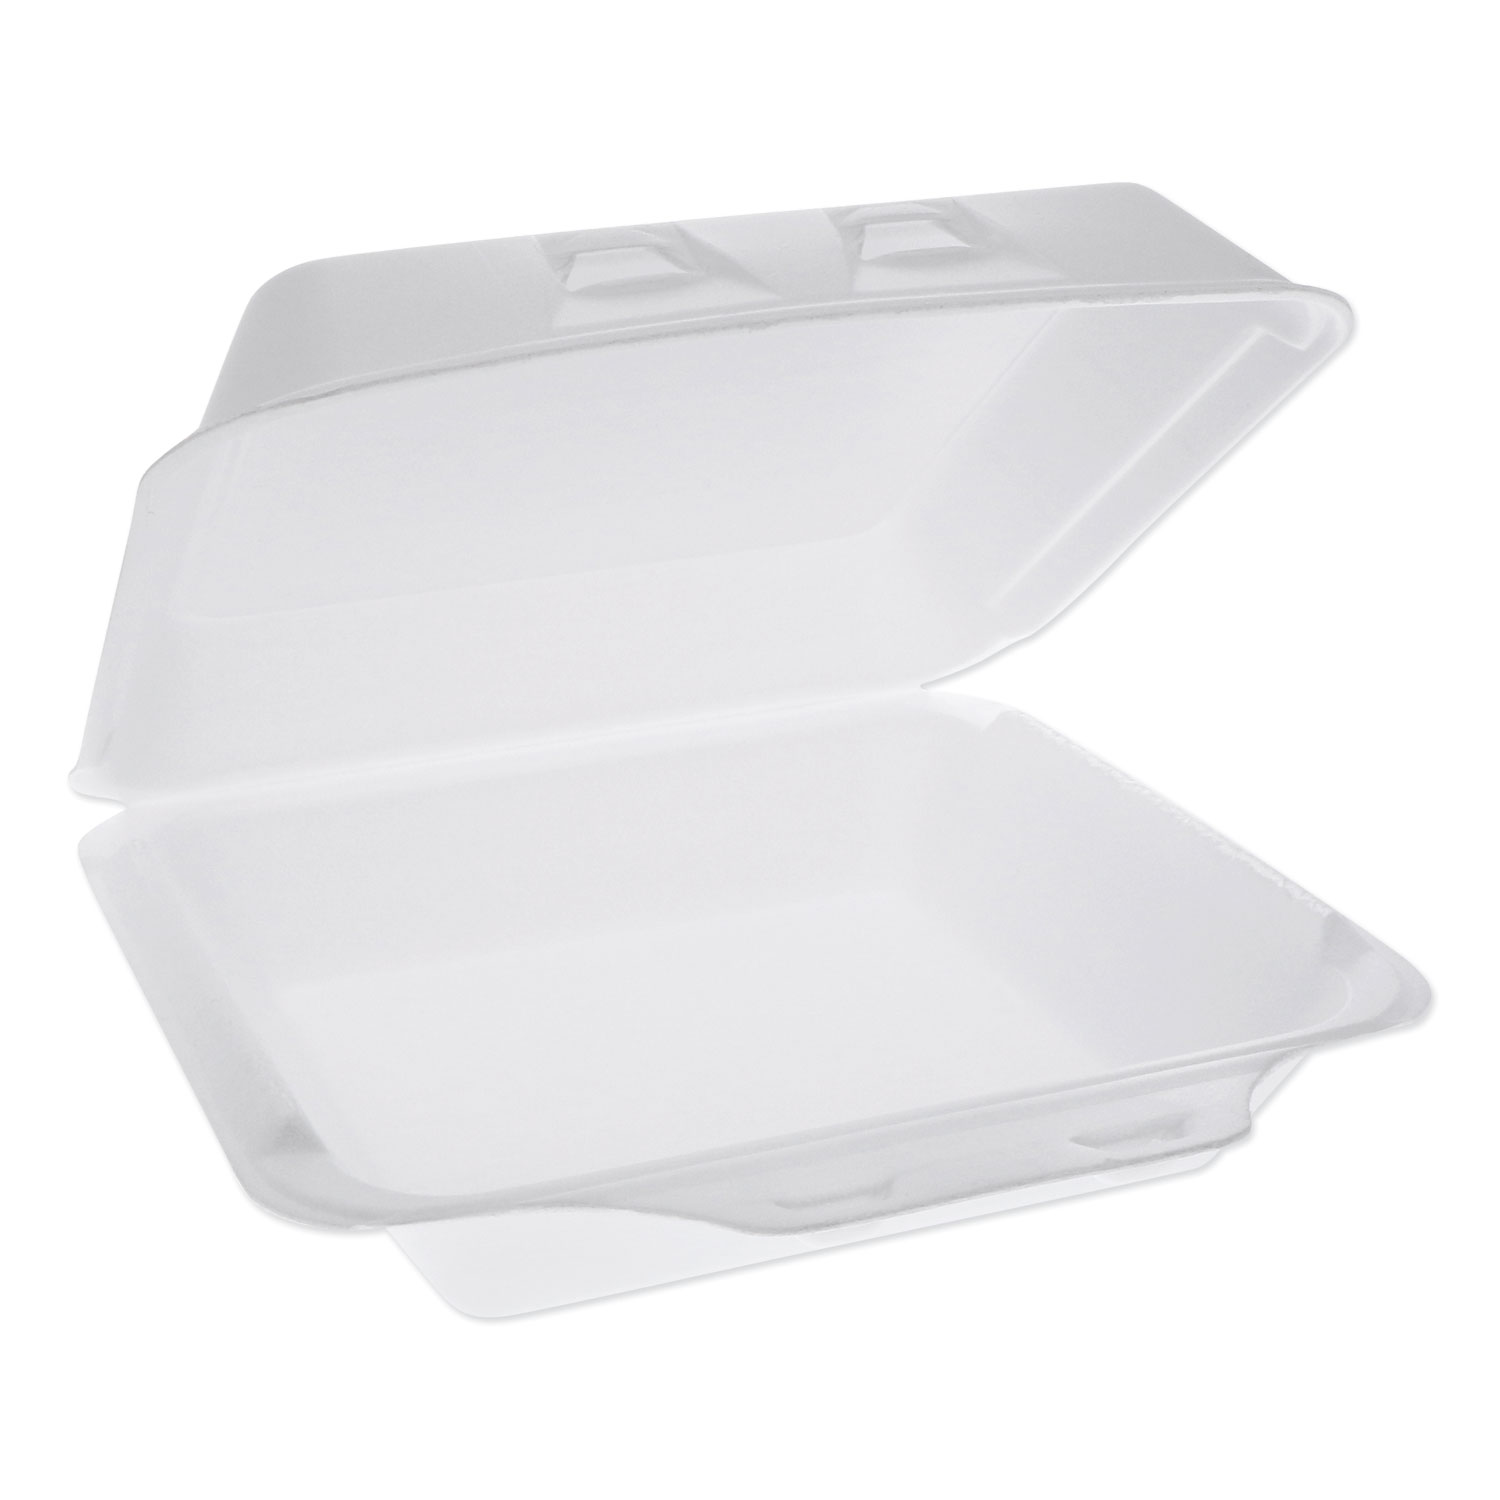  Pactiv YHLW09010000 SmartLock Foam Hinged Lid Containers, White, 9 x 9.5 x 3.25, 1-Compartment, 150/Carton (PCTYHLW0901) 